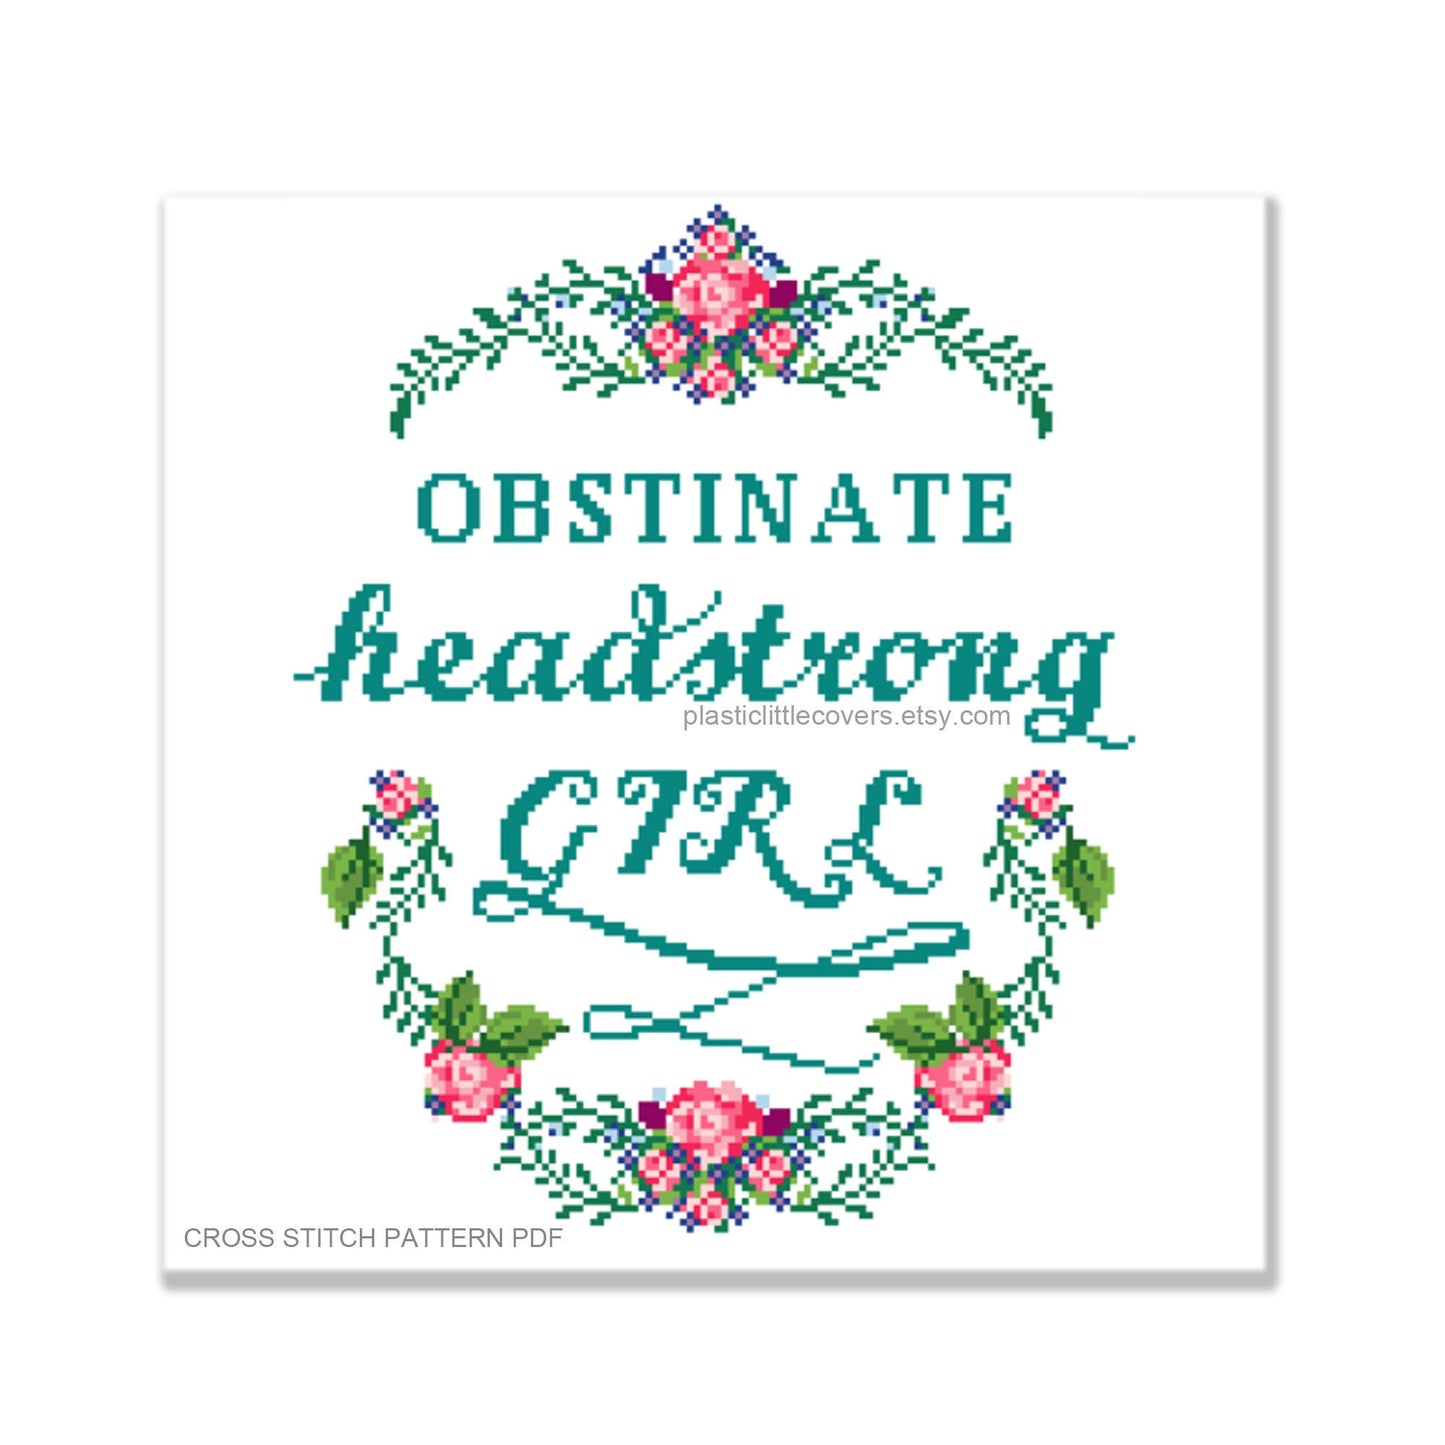 Obstinate, Headstrong Girl - Cross Stitch Pattern PDF.